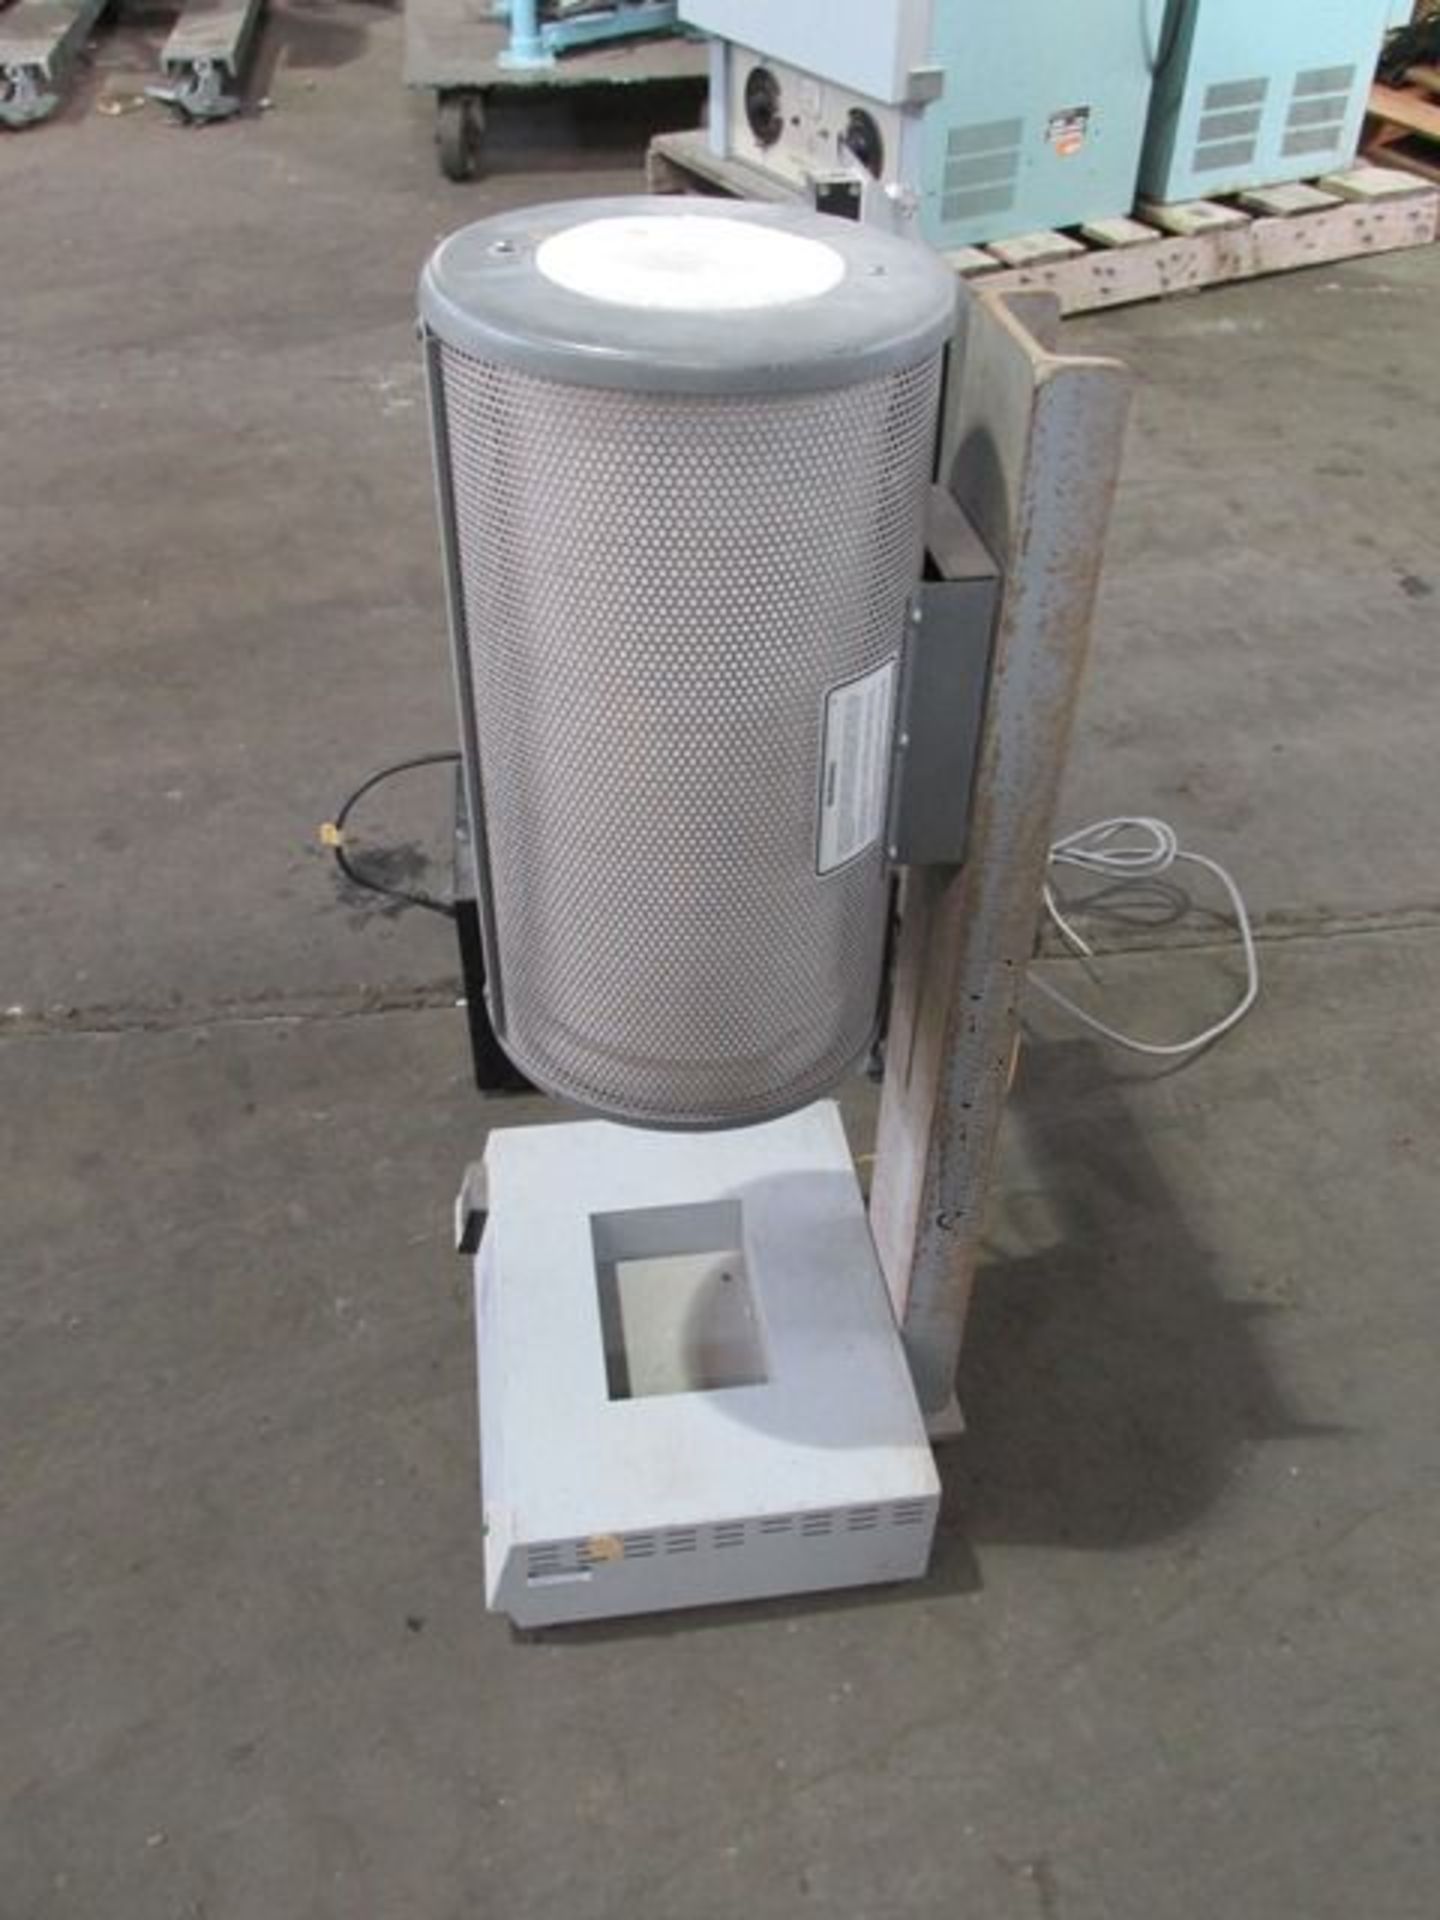 2" X 12" THERMO LINE TUBE FURNACE, TYPE 21100 - Image 2 of 7